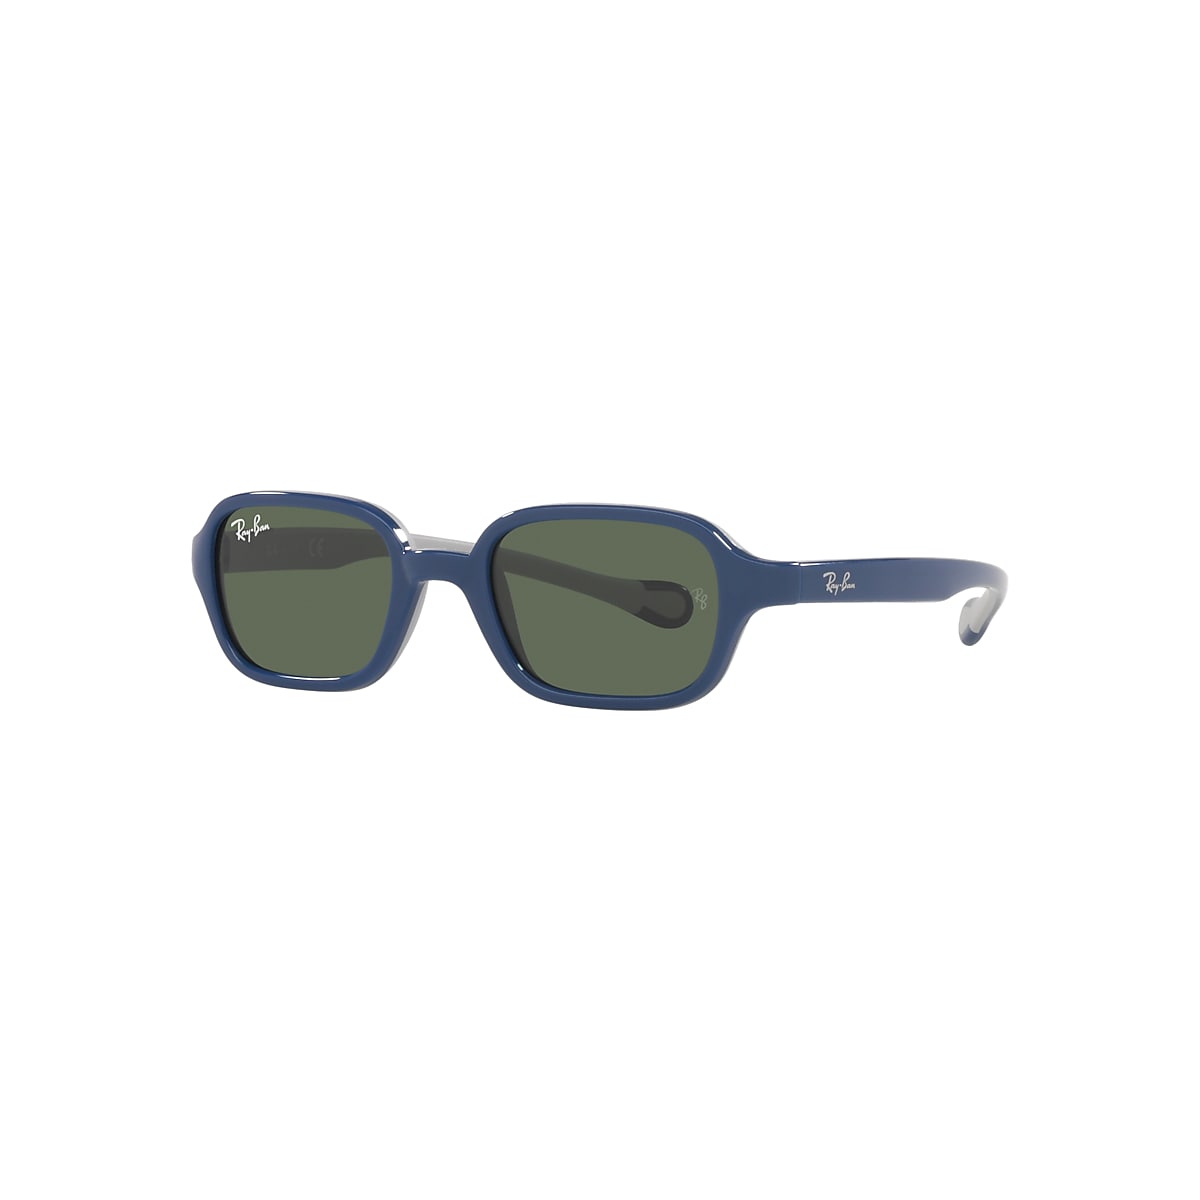 RB9074S KIDS Sunglasses in Blue On Grey and Green - Ray-Ban